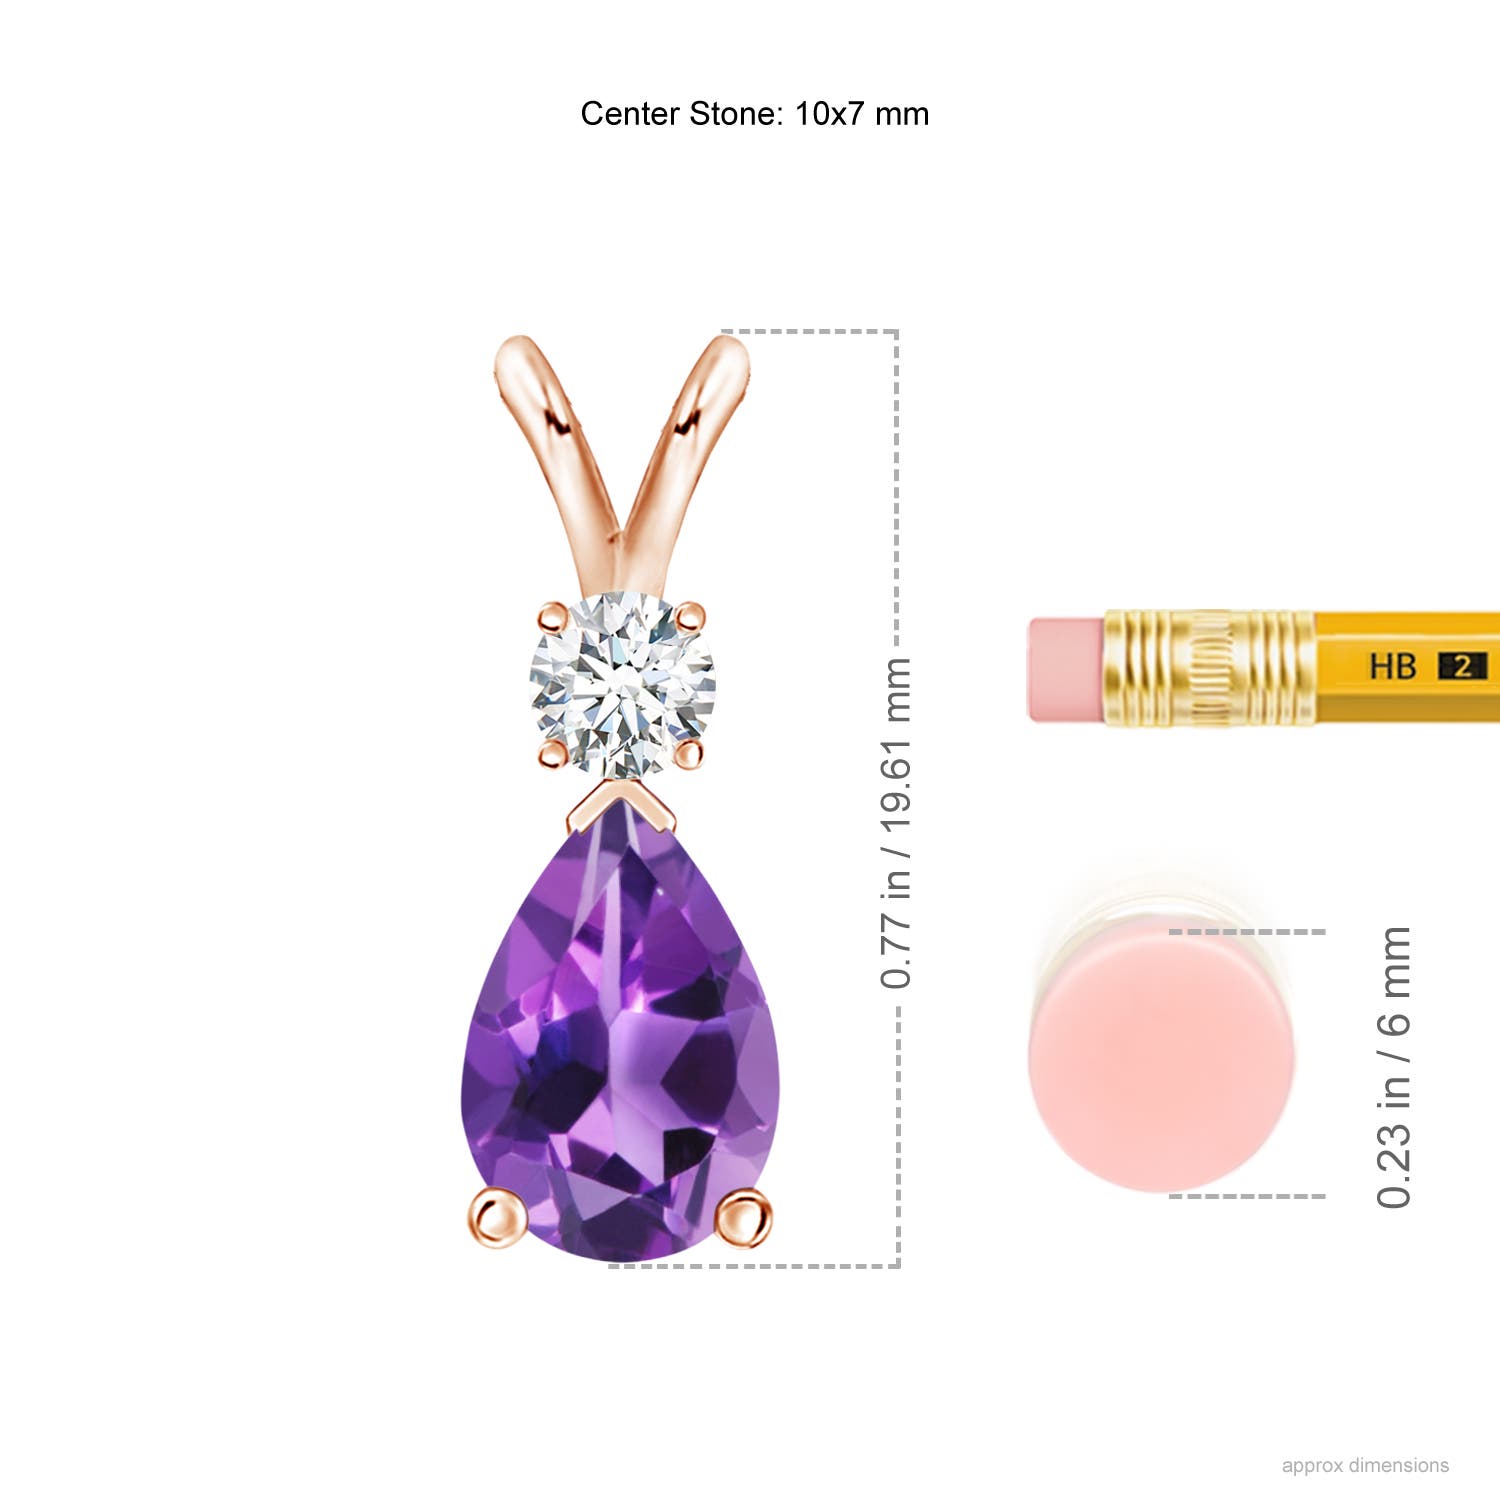 AAA - Amethyst / 1.78 CT / 14 KT Rose Gold